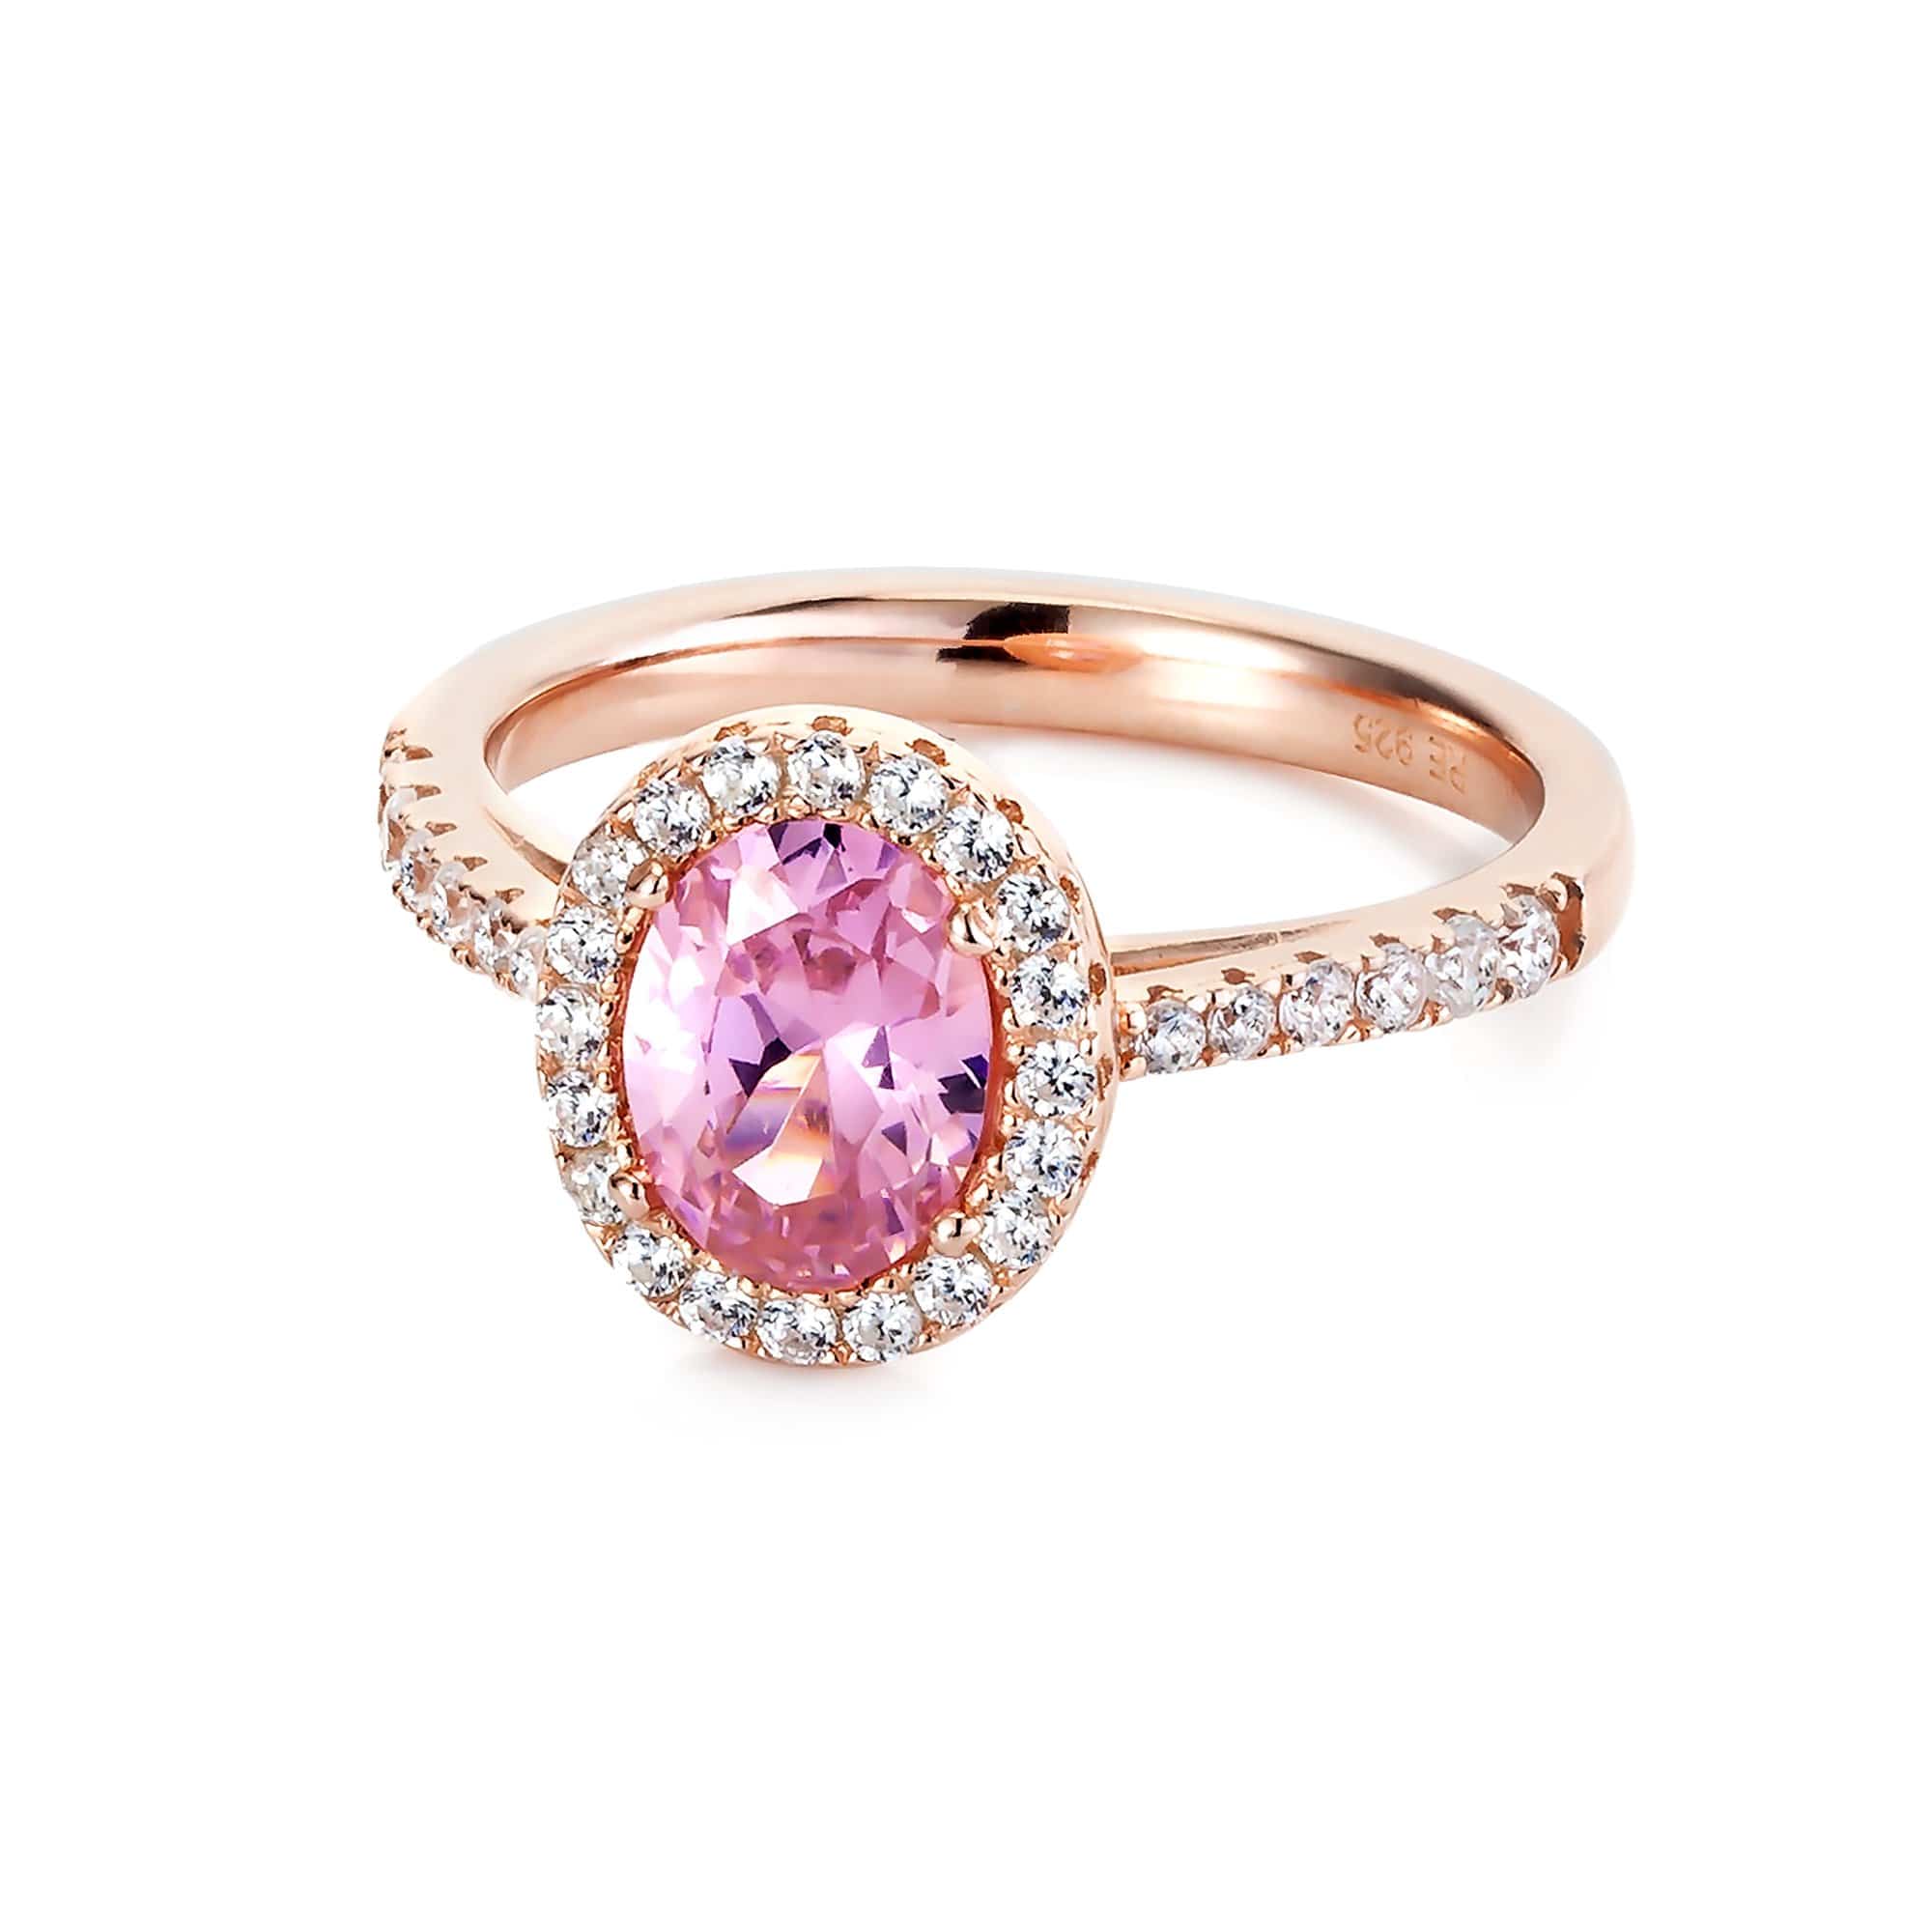 Lynora Jewellery Ring Opulence Pink Tourmaline Pave Ring Rose Gold Plate